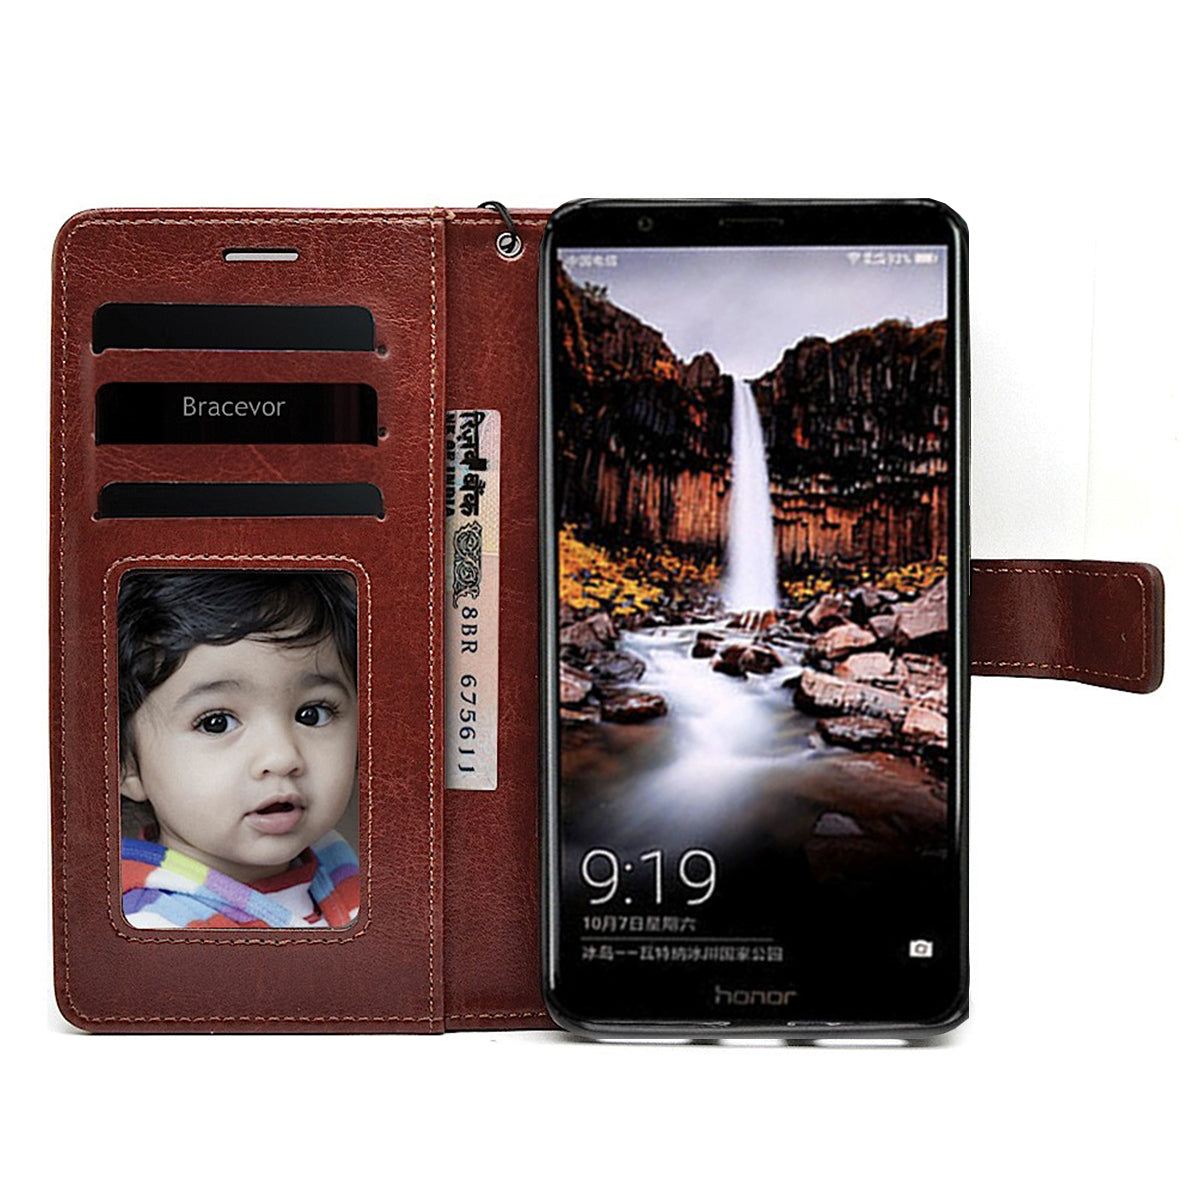 Bracevor Huawei Honor 7X Flip Cover Case | Premium Leather | Inner TPU | Foldable Stand | Wallet Card Slots - Executive Brown